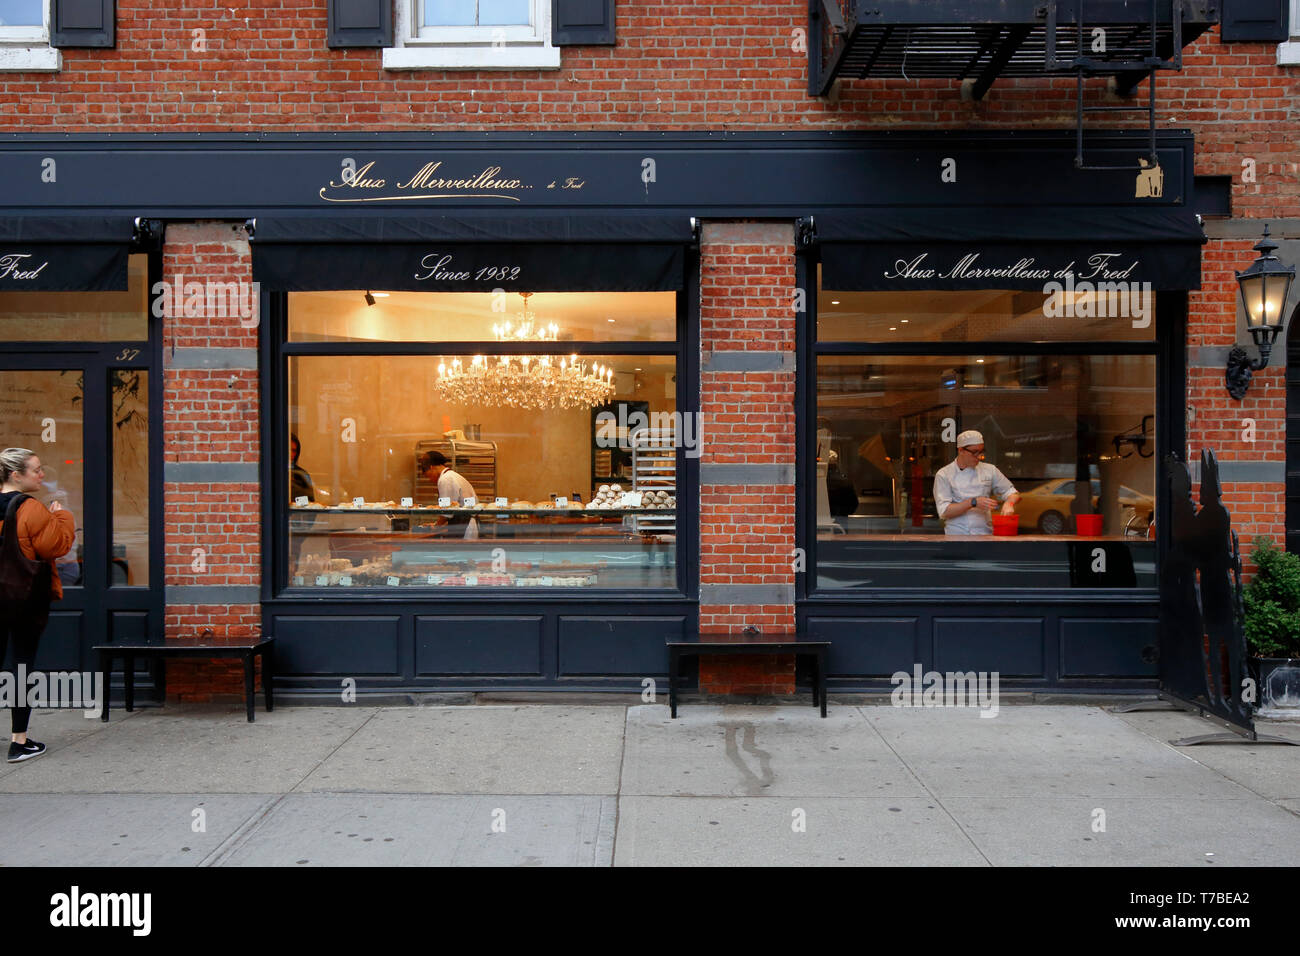 Aux Merveilleux de Fred, 37 8th Avenue, New York, NY. exterior storefront of a french pastry shop in the Greenwich Village neighborhood of Manhattan. Stock Photo